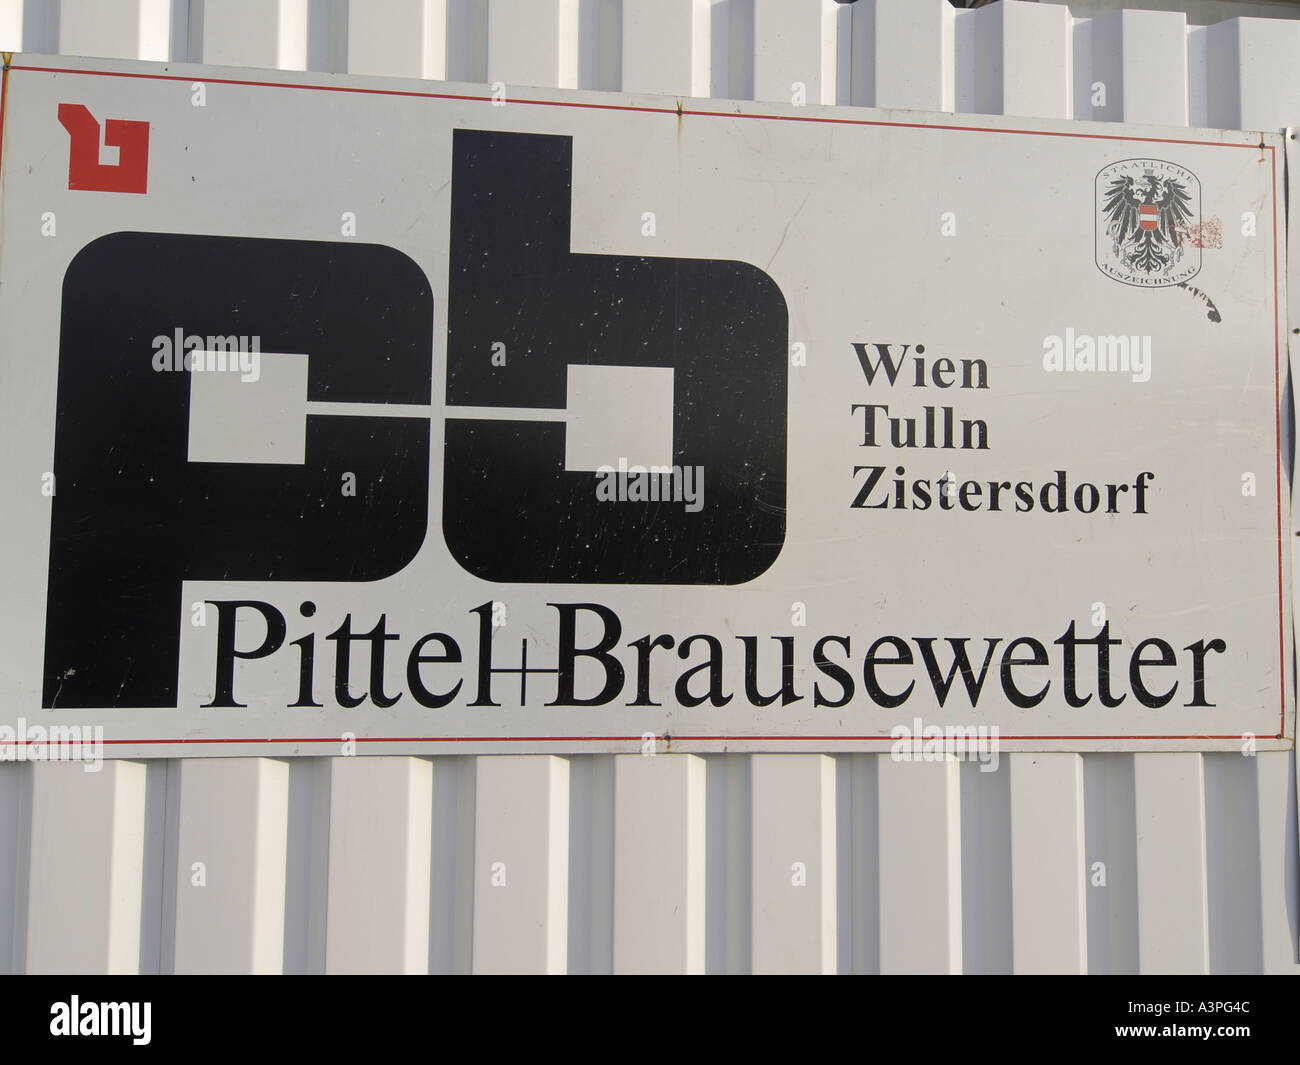 sign building company Pittel and Brausewetter locations Vienna Tulln Zistersdorf Stock Photo